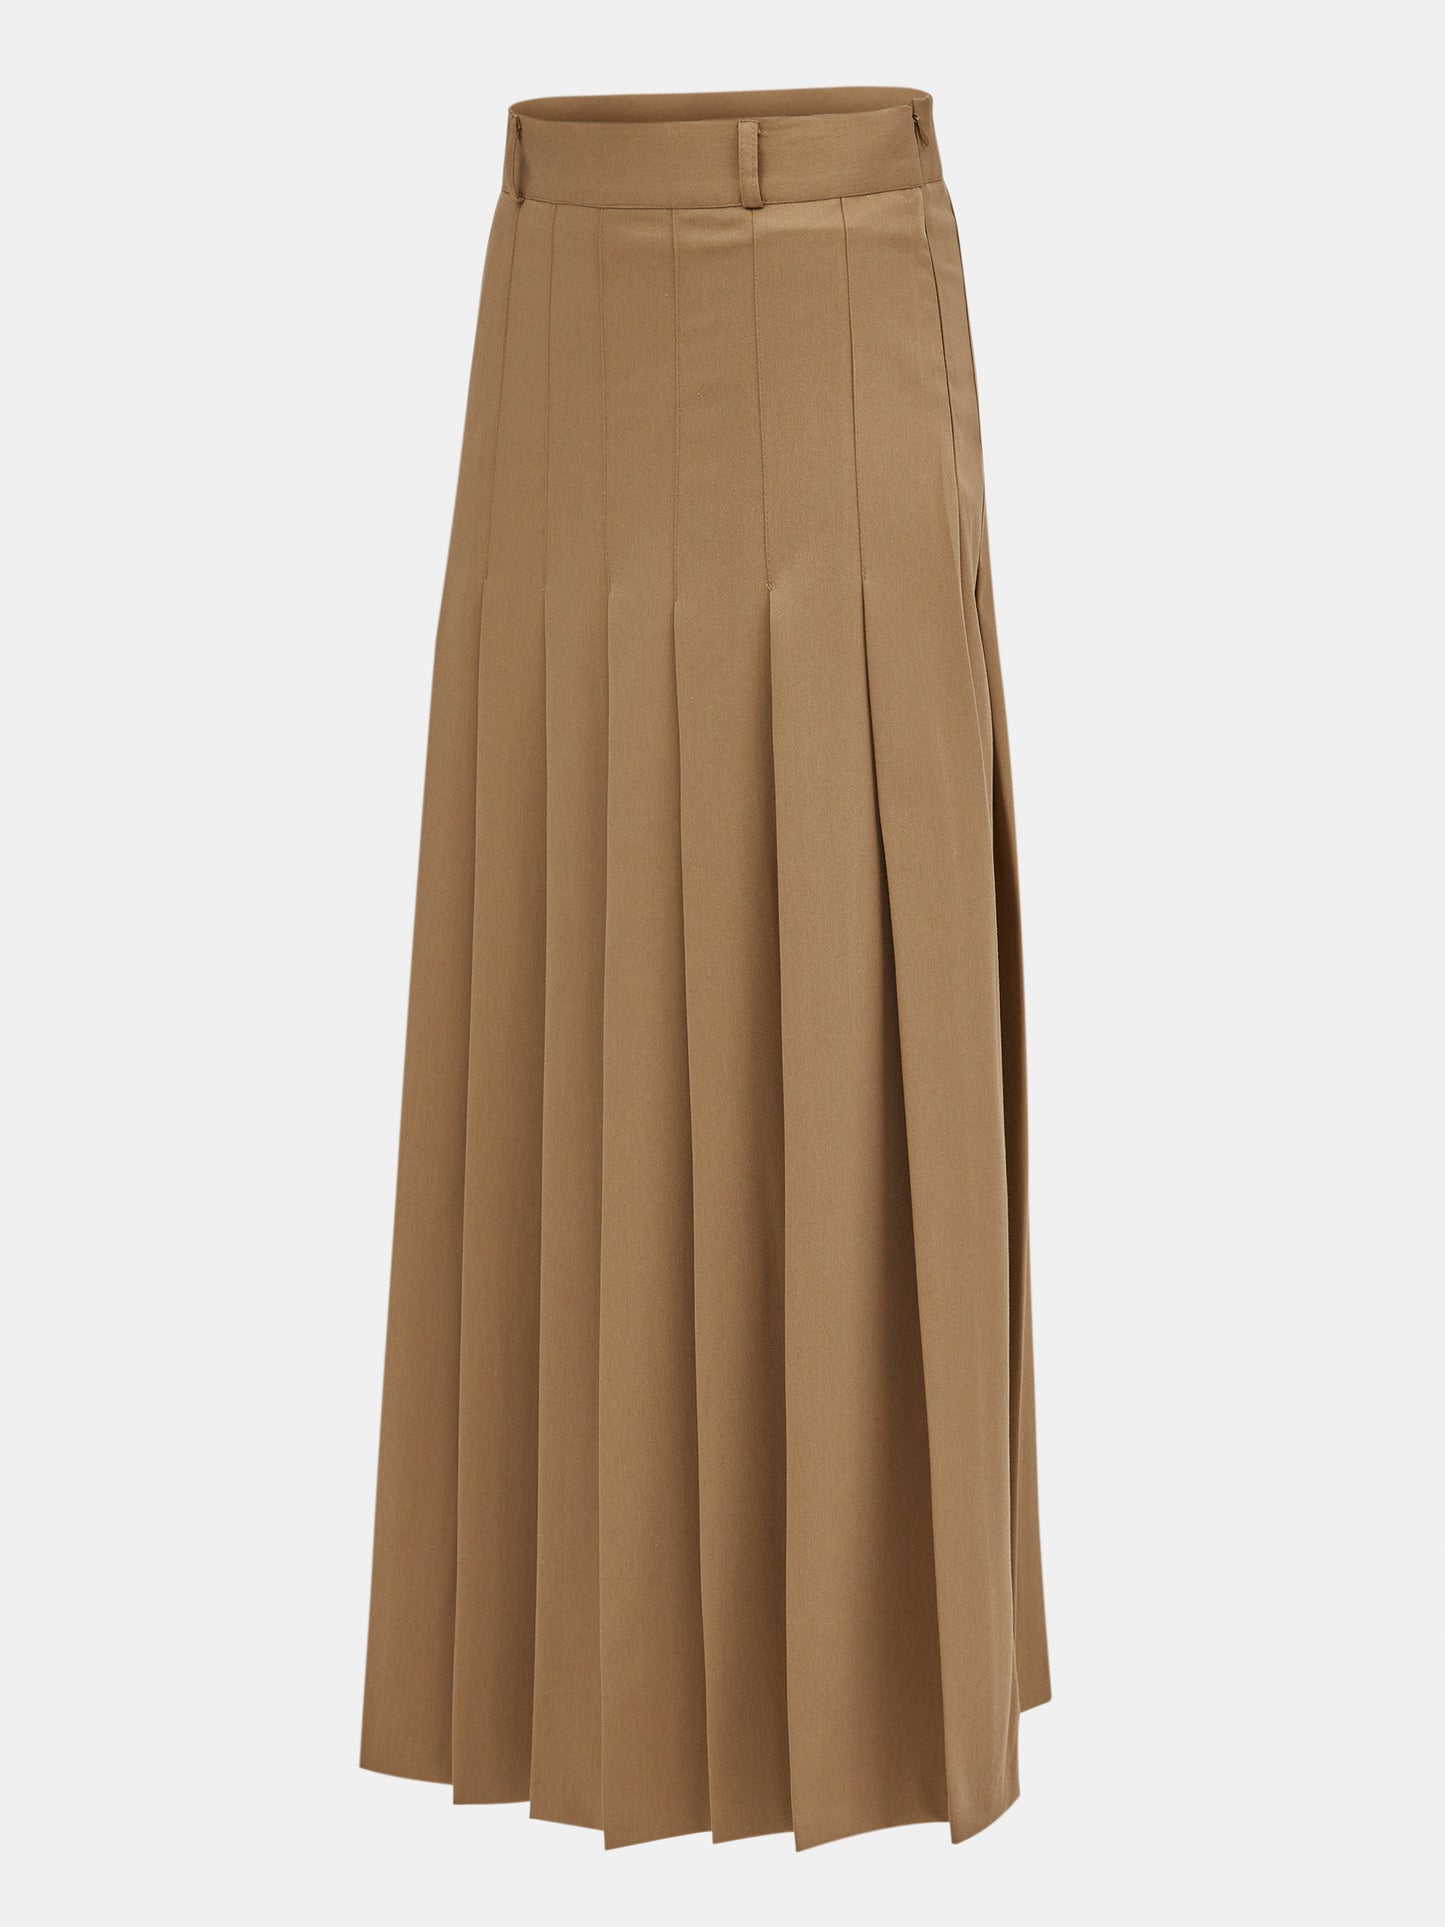 Pleat Maxi Skirt, Earthy Orche